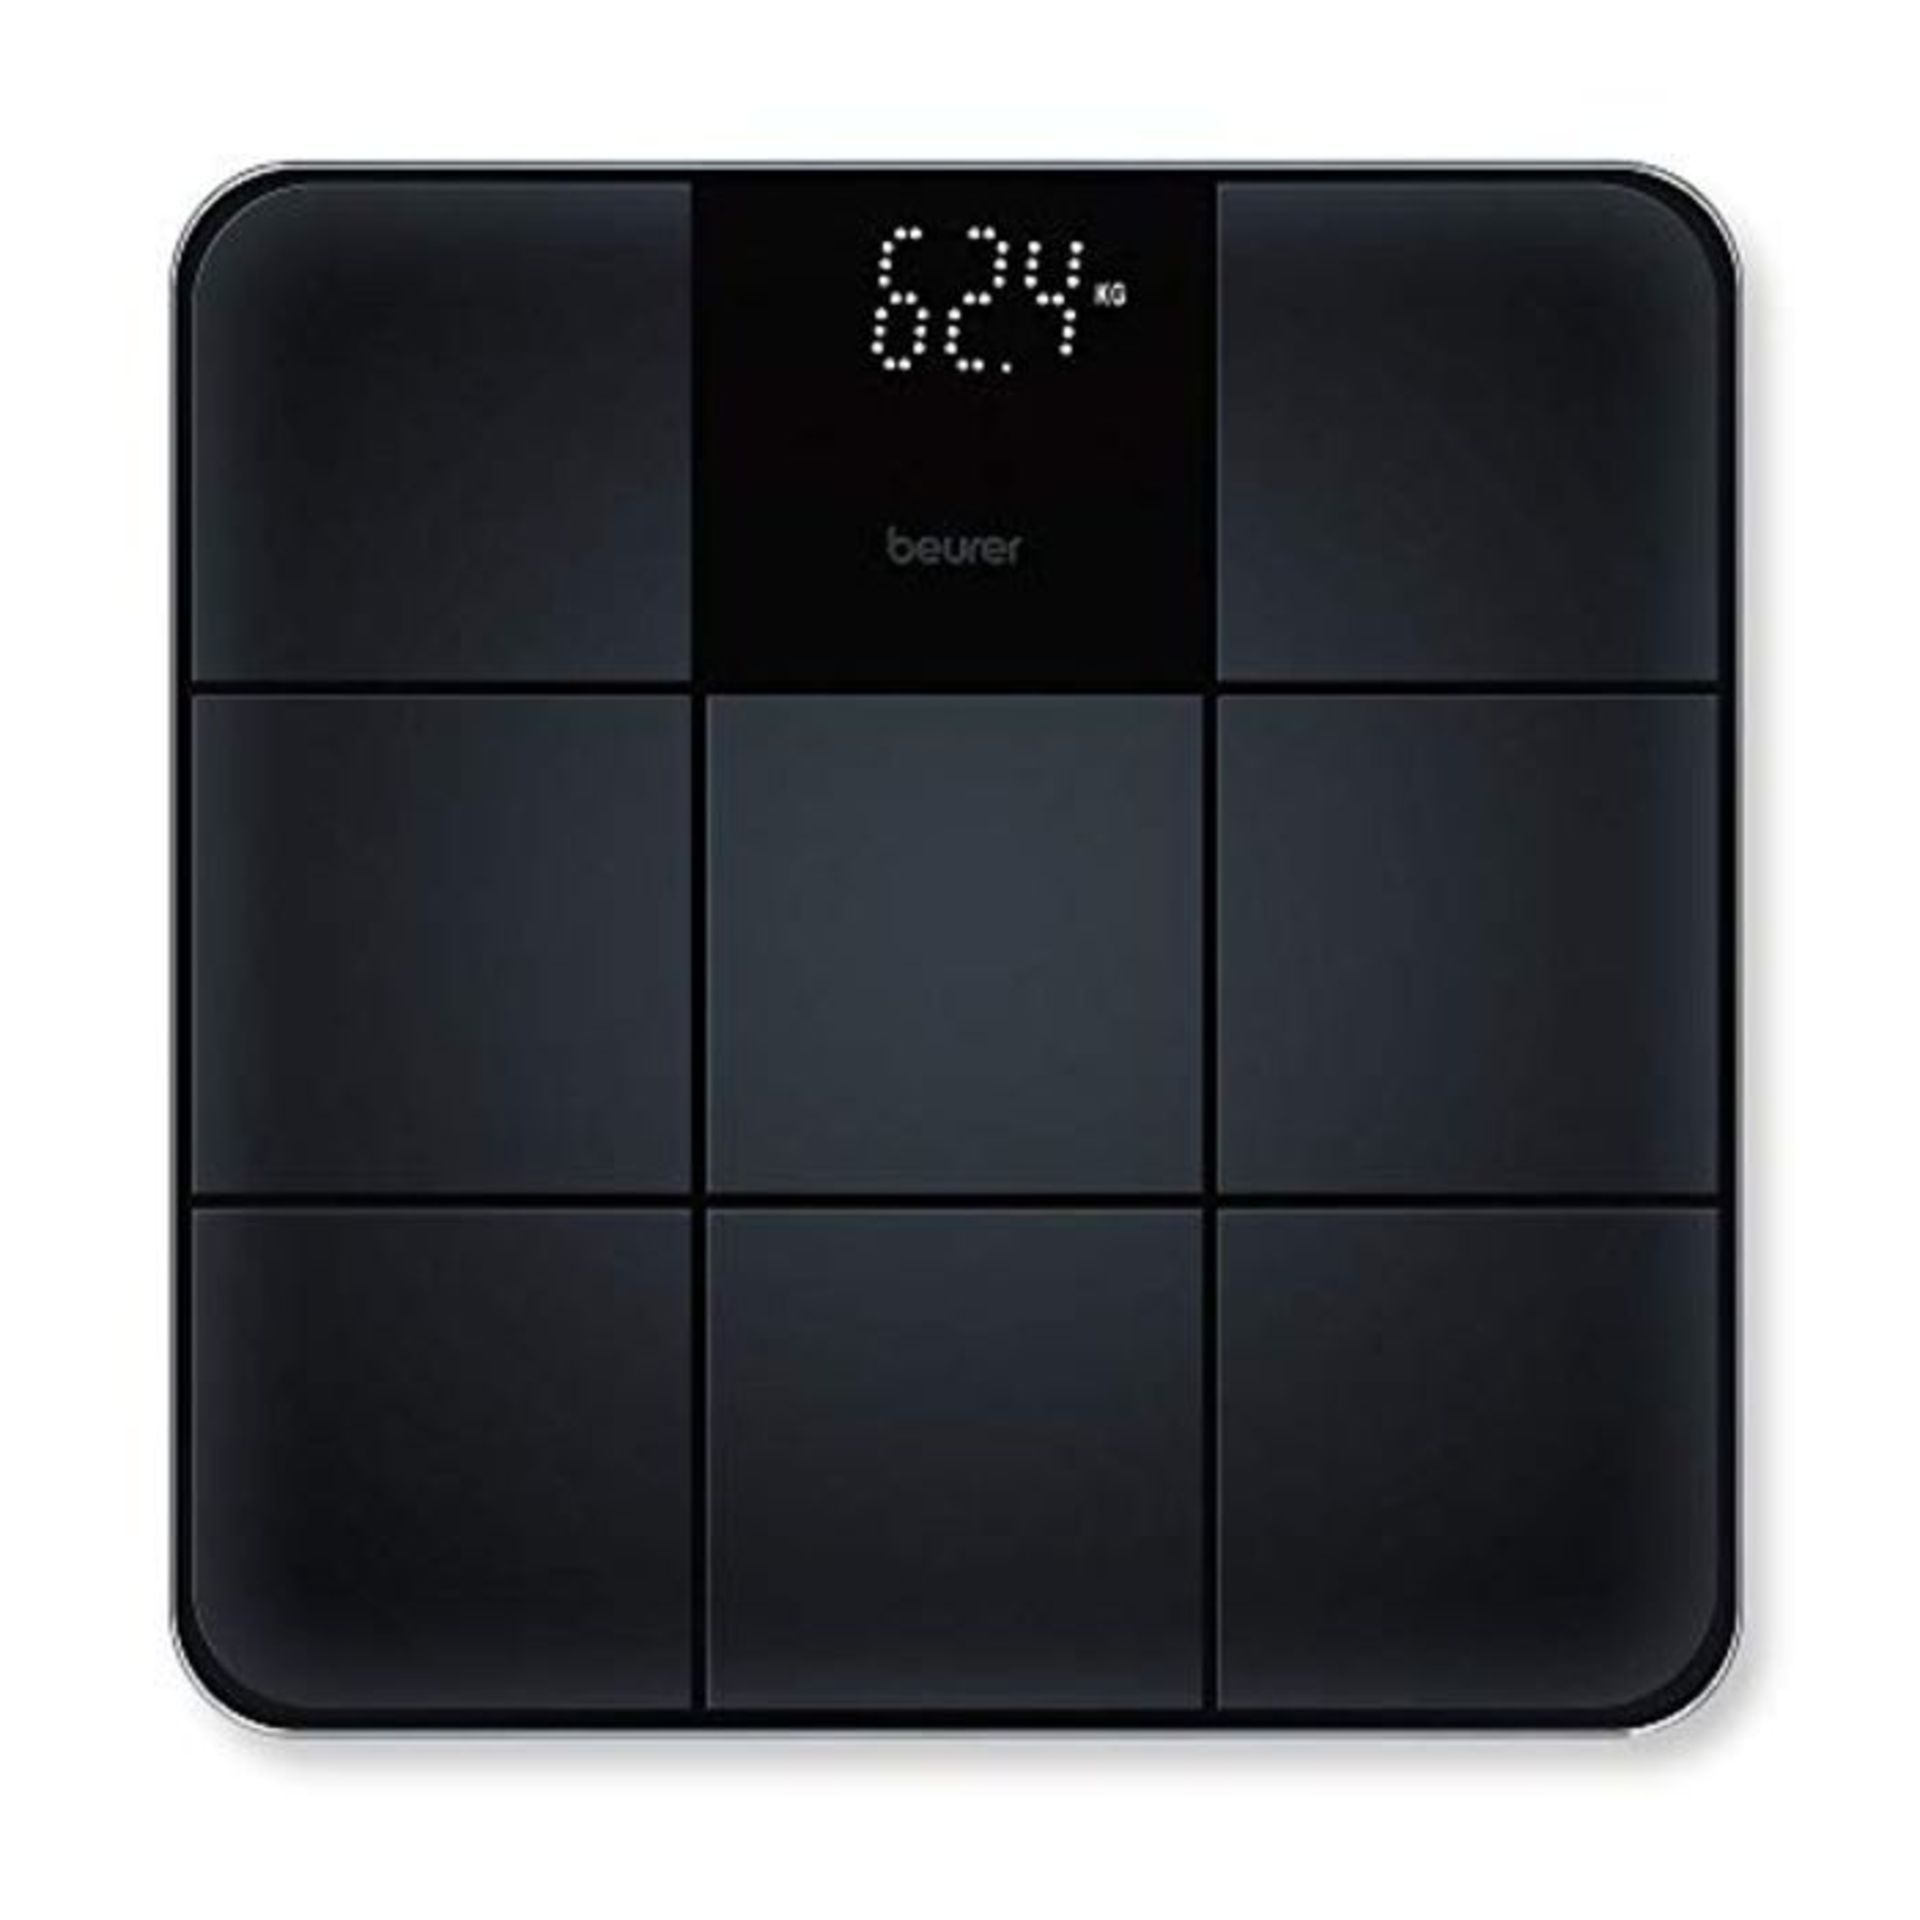 Beurer GS235 Bathroom Scale with Sleek Non-Slip Tile Effect Surface